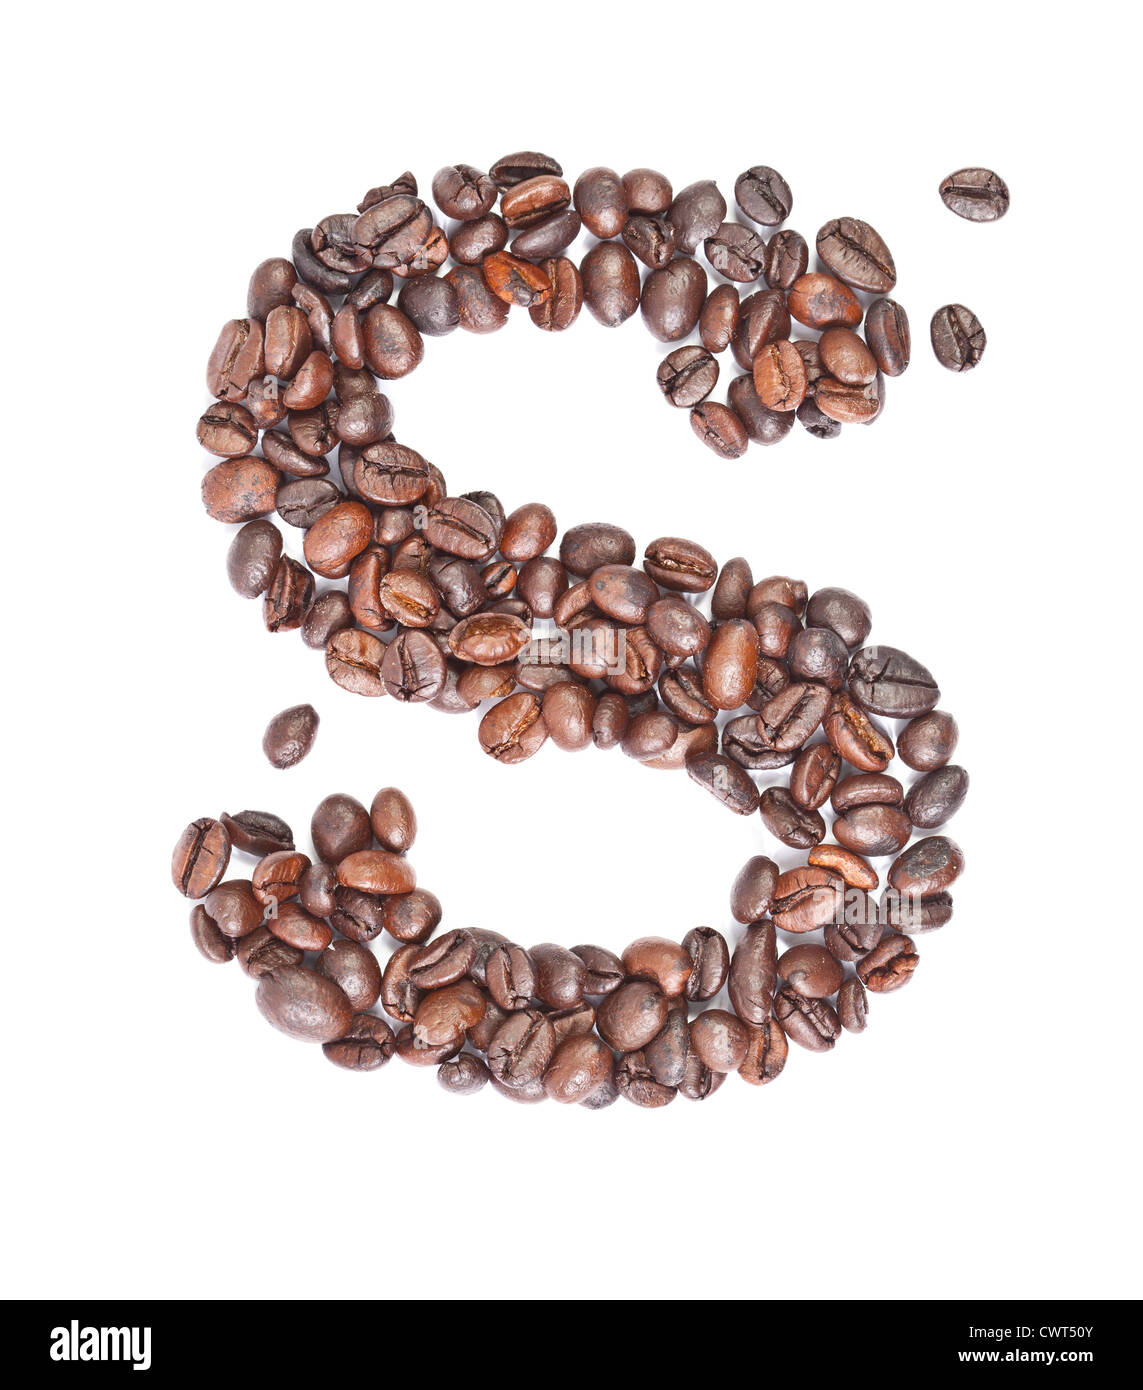 s, Alphabet from coffee beans on white background. Stock Photo